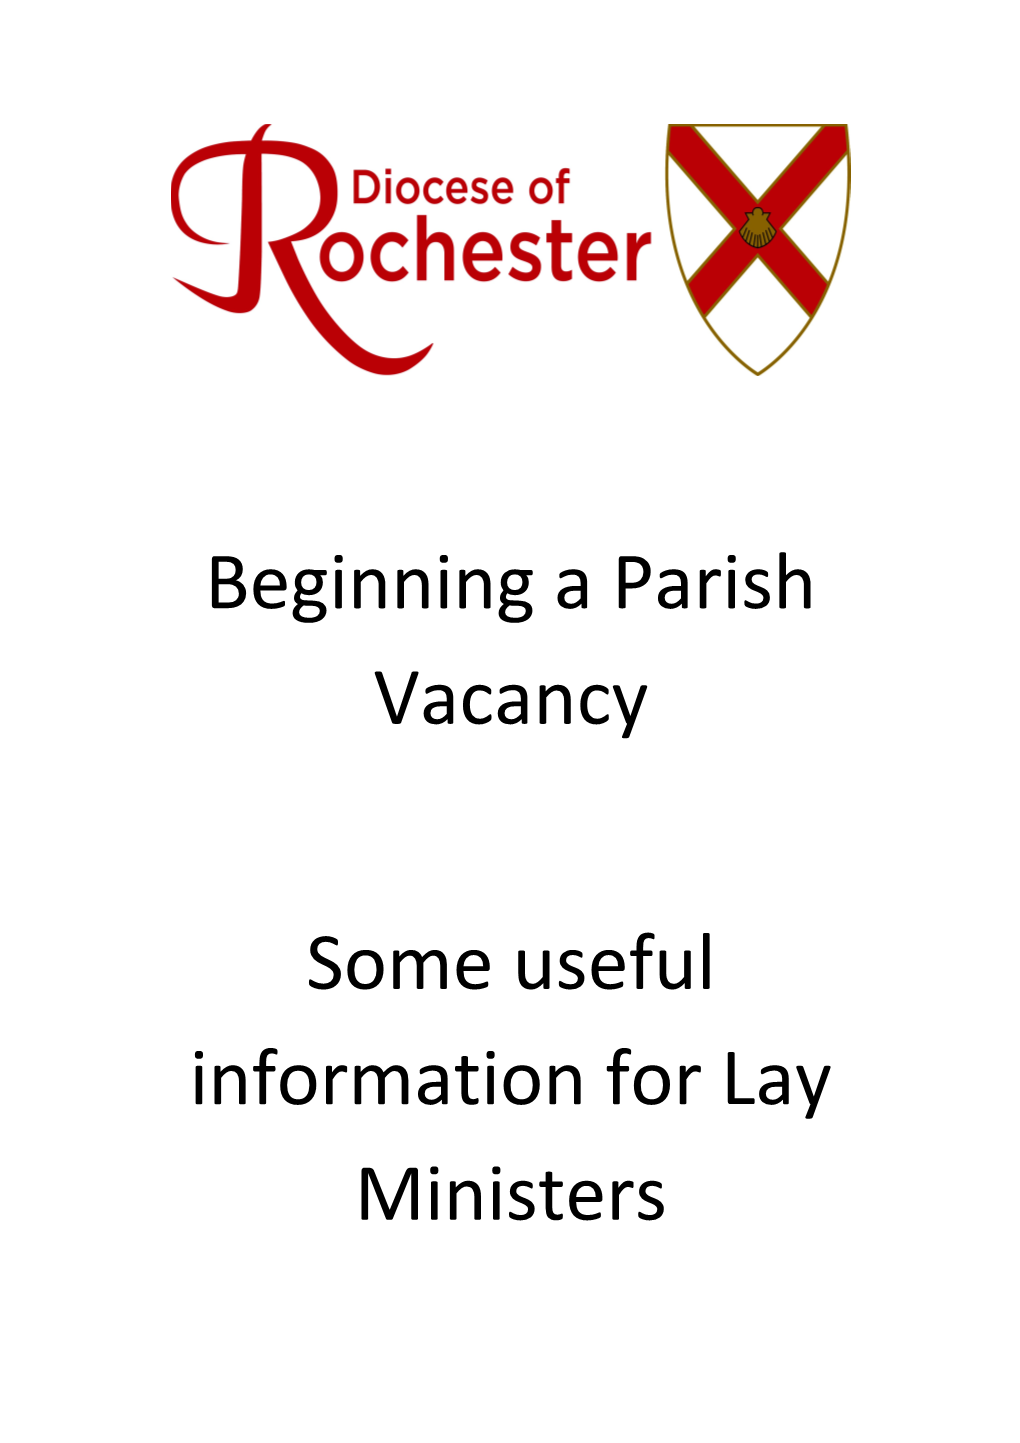 Some Useful Information for Lay Ministers